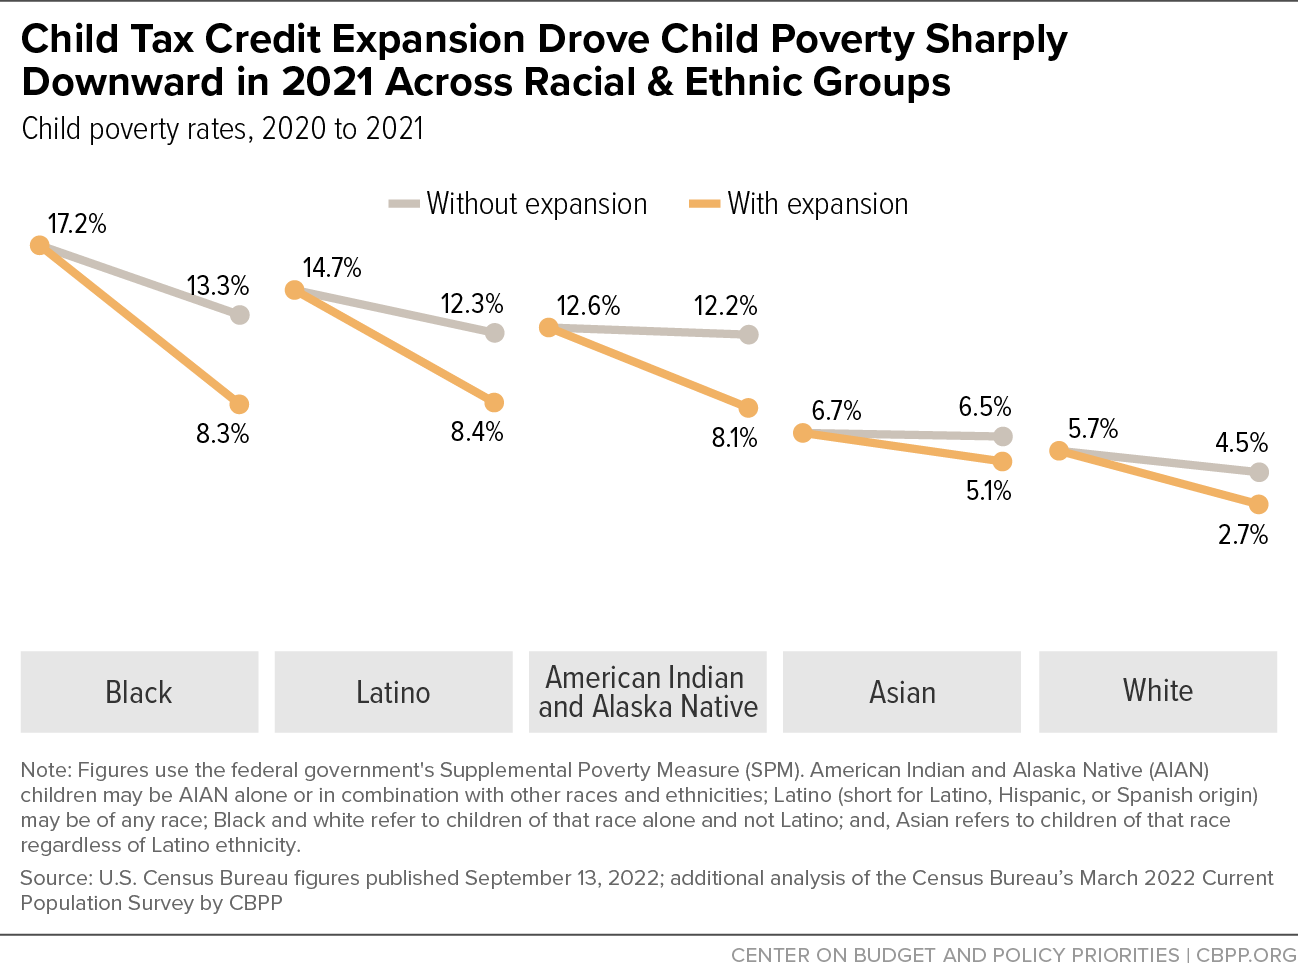 Child Tax Credit Expansion Drove Child Poverty Sharply Downward in 2021 Across Racial & Ethnic Groups